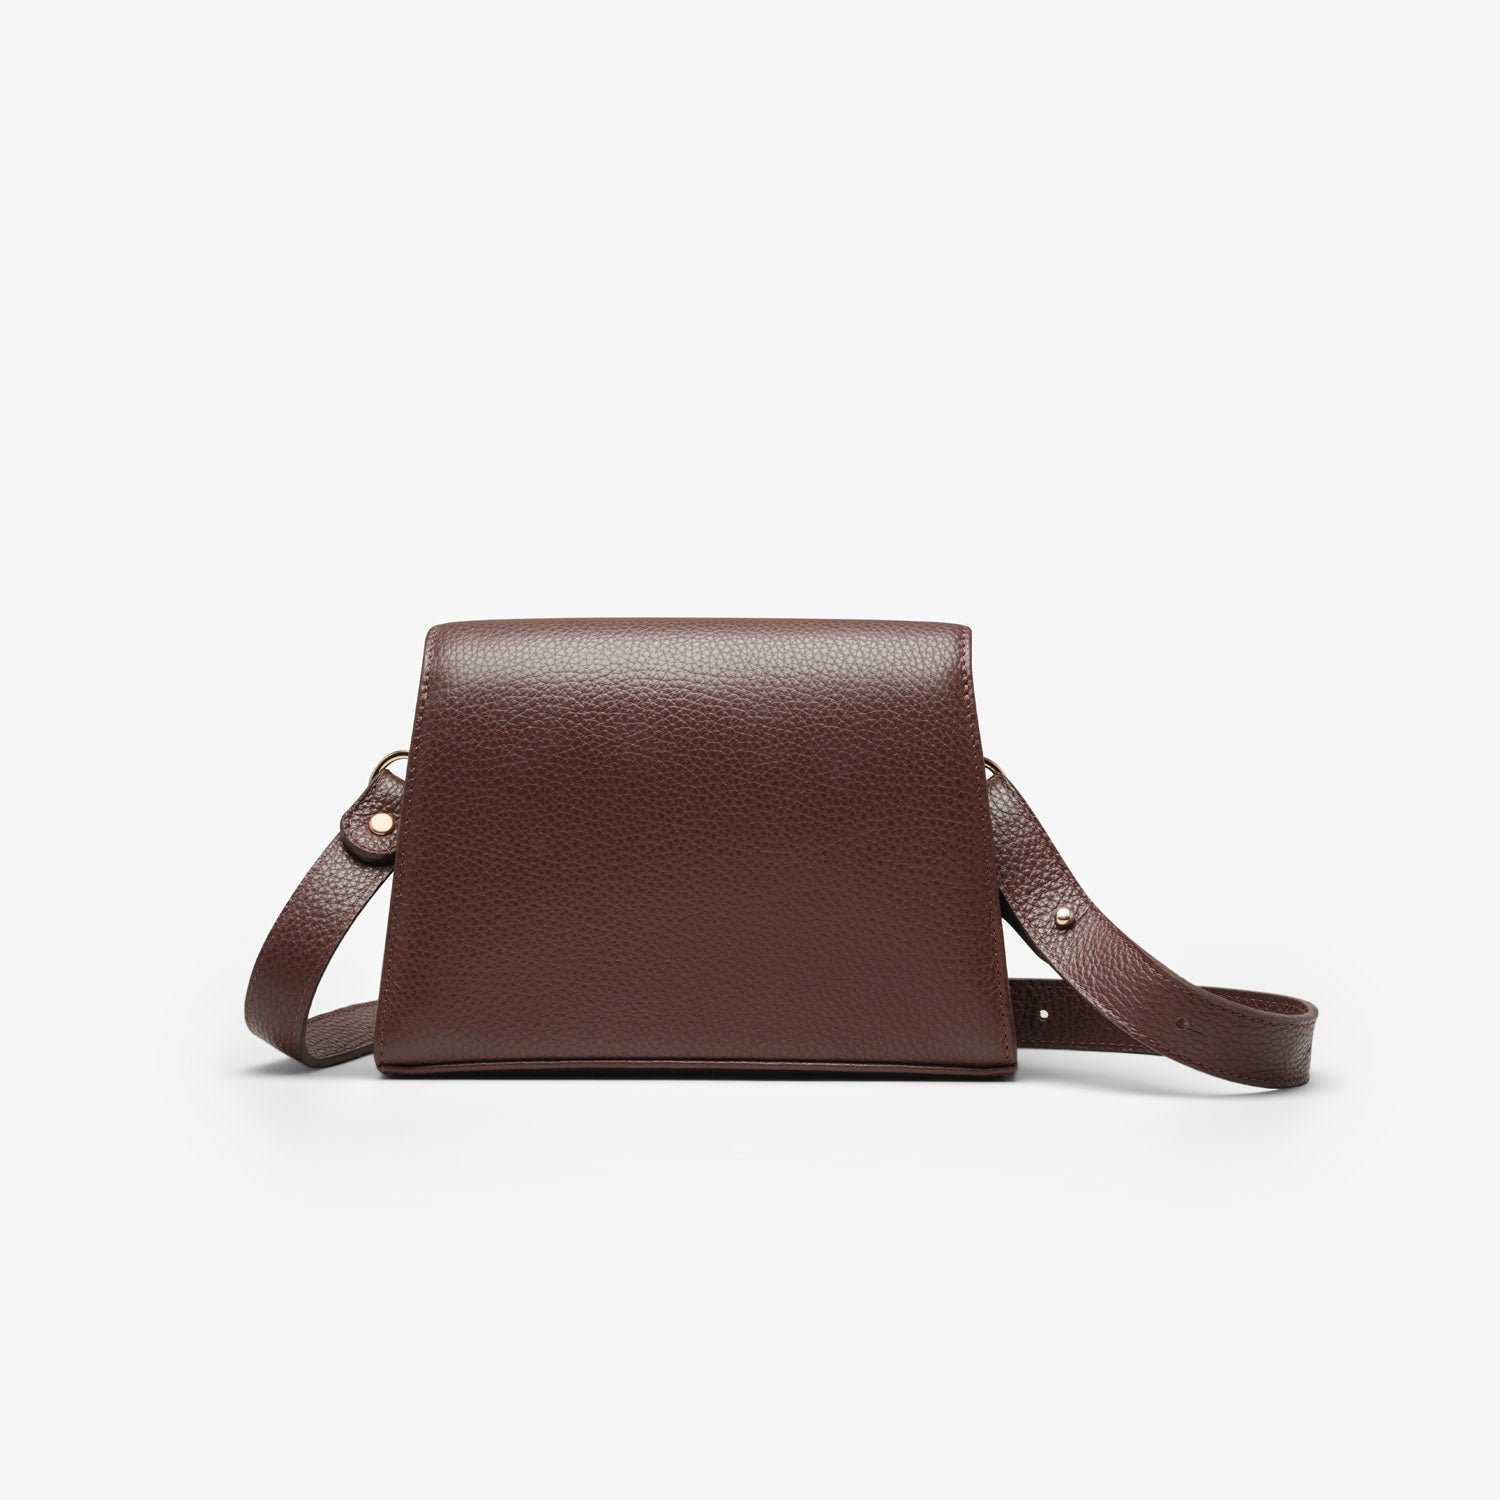 Shows the backside of a dark brown grained leather handbag with light gold metalware and an adjustable strap for a comfortable crossbody or shoulder fit. 